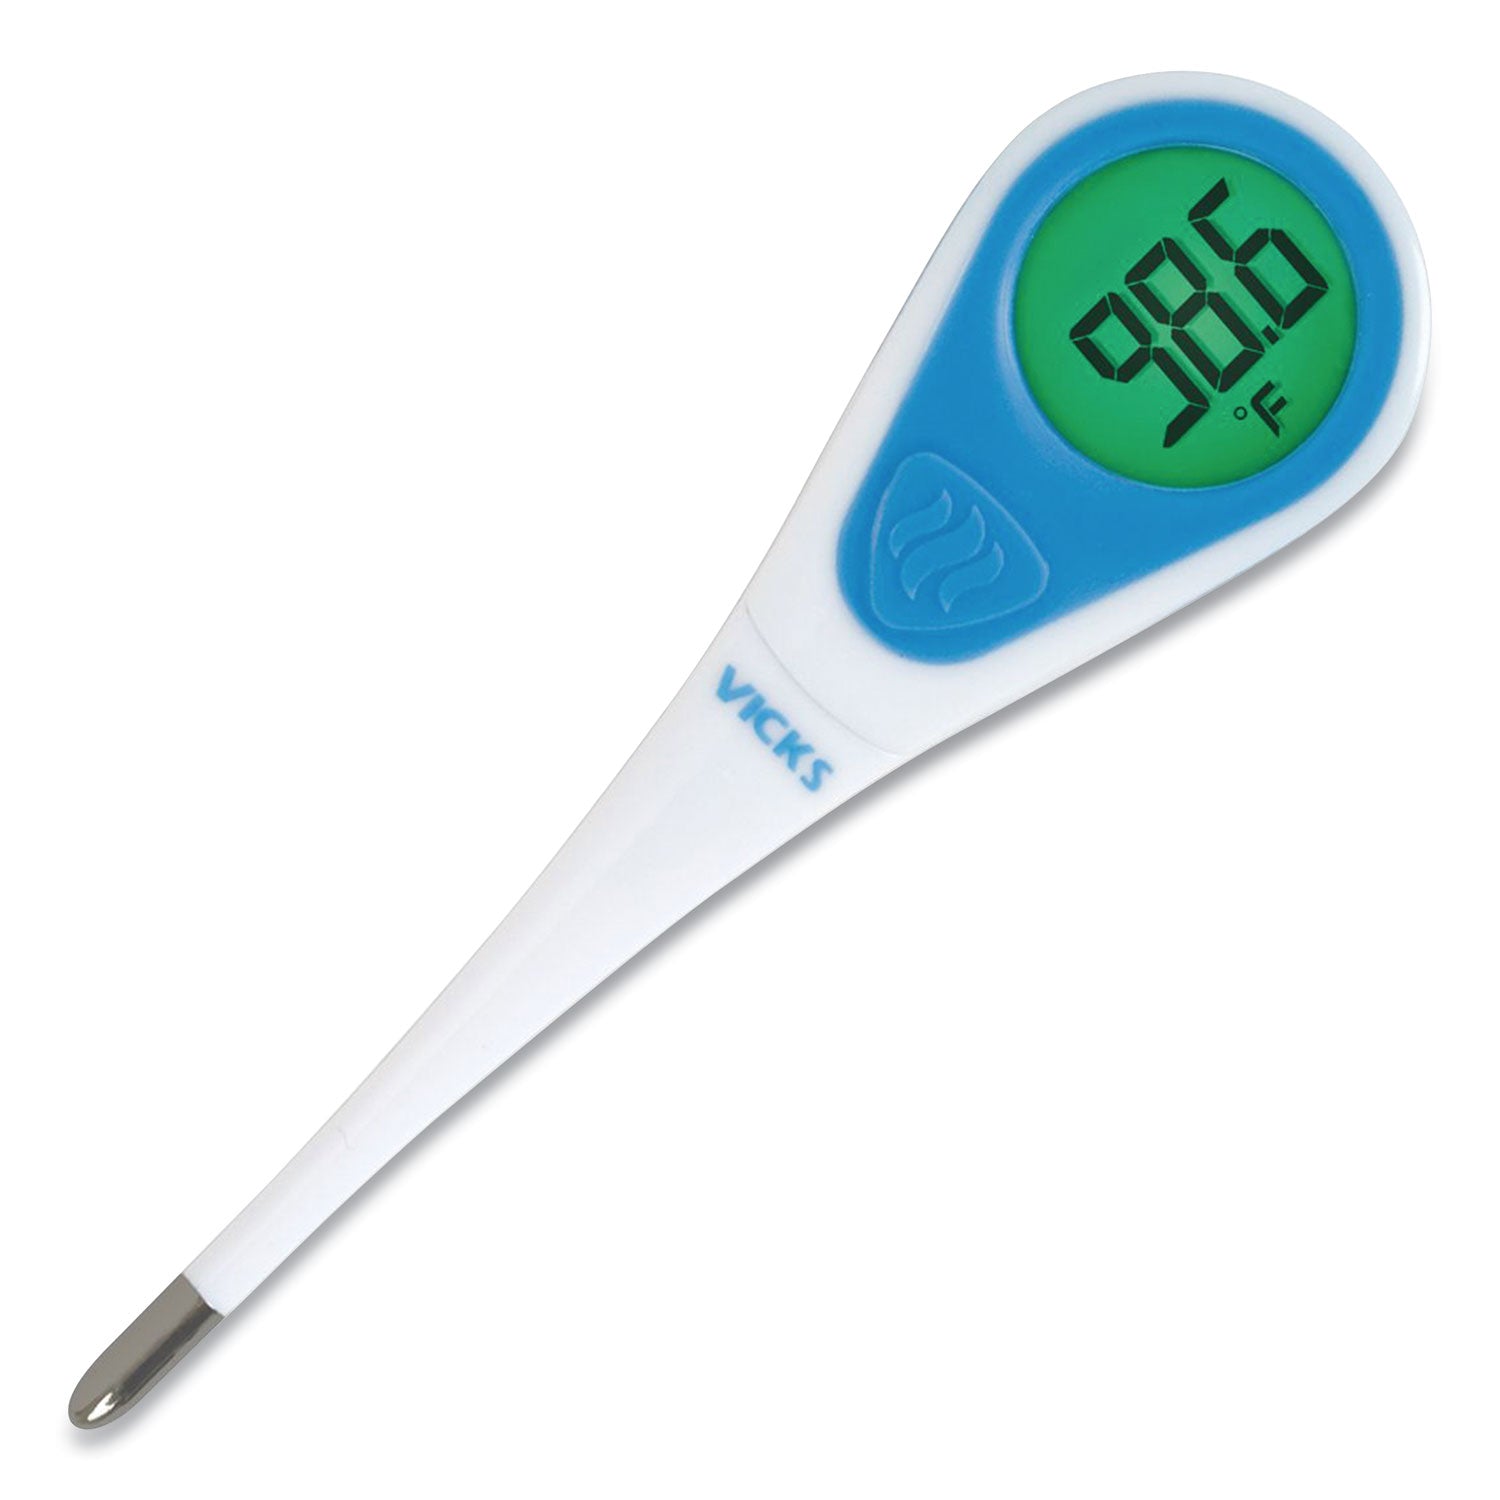 speedread-digital-thermometer-with-fever-insight-white-blue_pgcv912us - 1